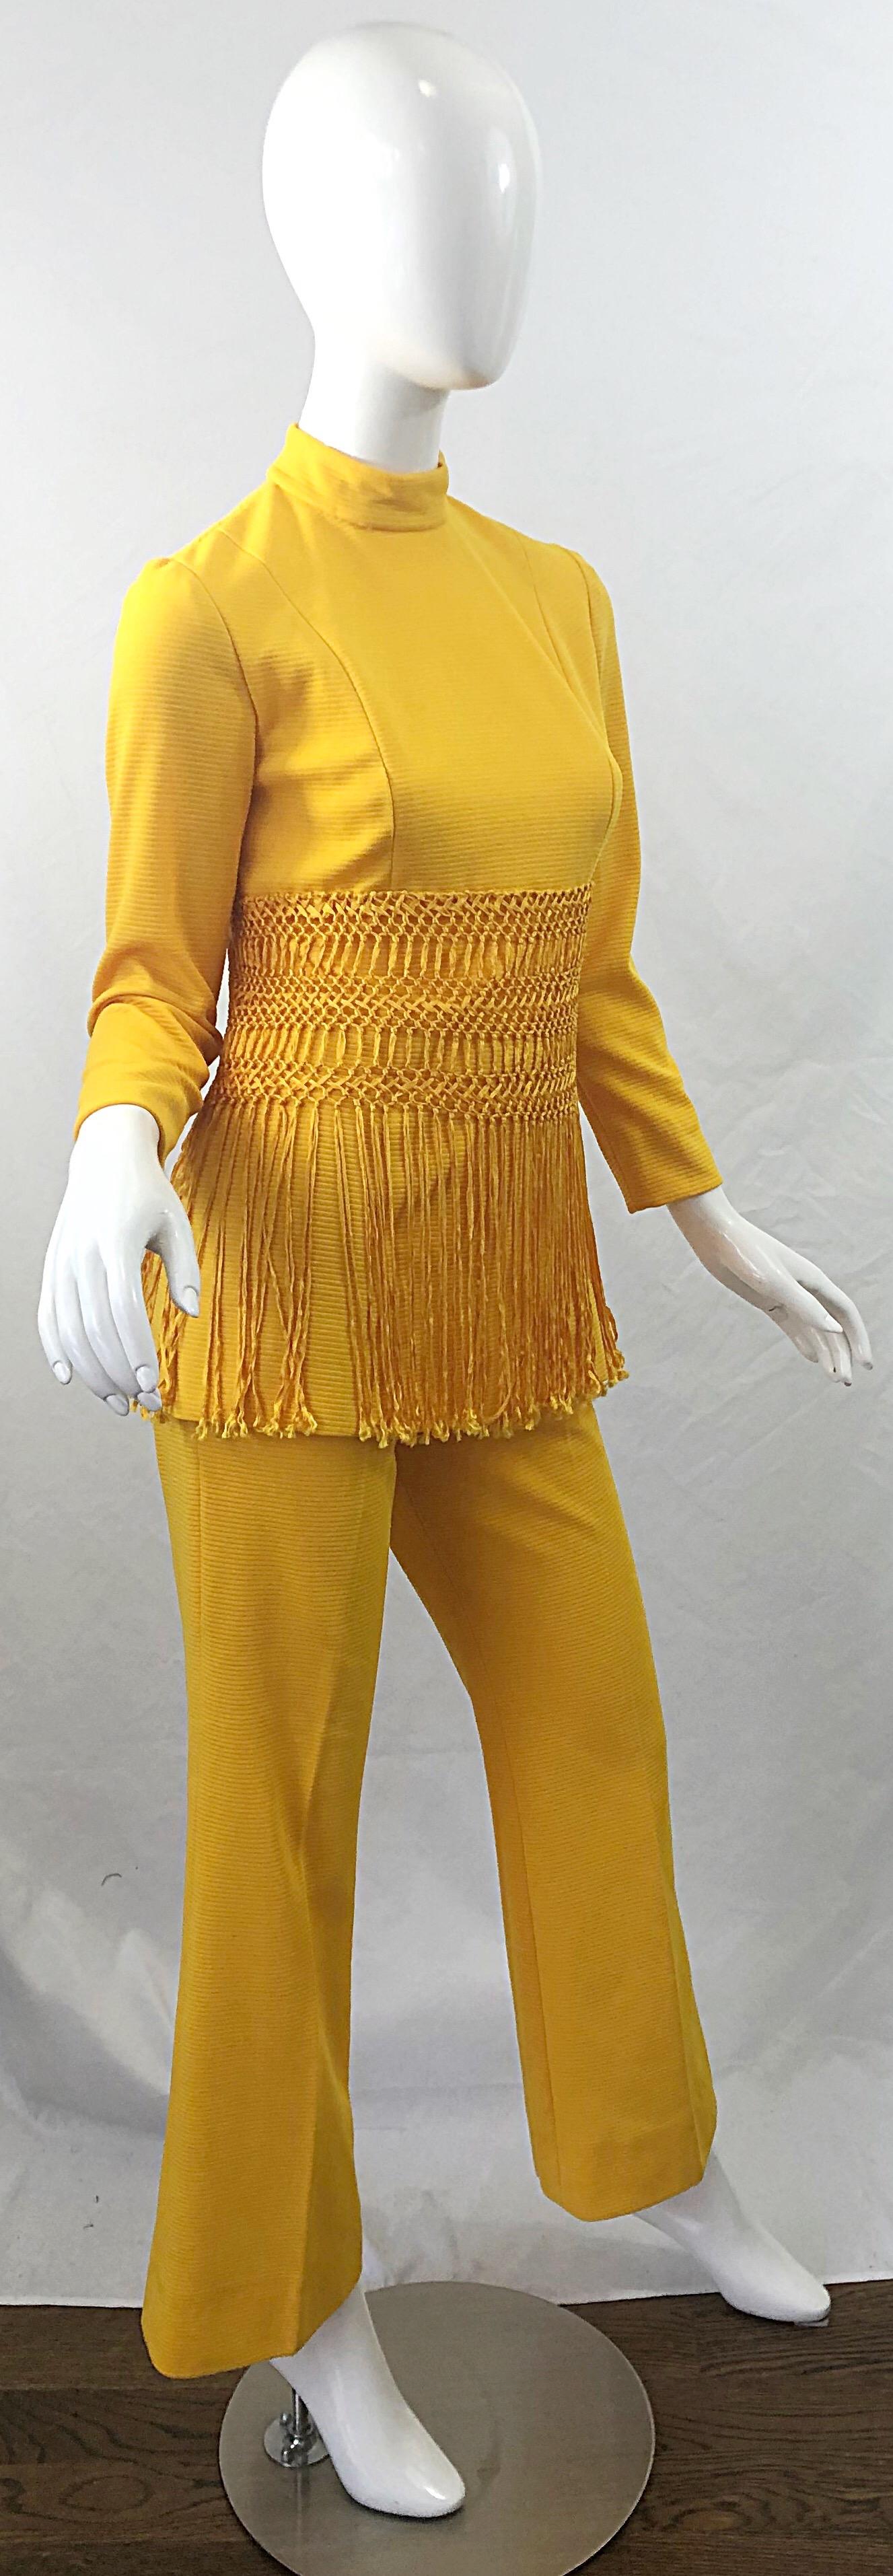 1970s Canary Yellow Fringe Vintage Knit Tunic Top + 70s Bell Bottom Flared Pants 2